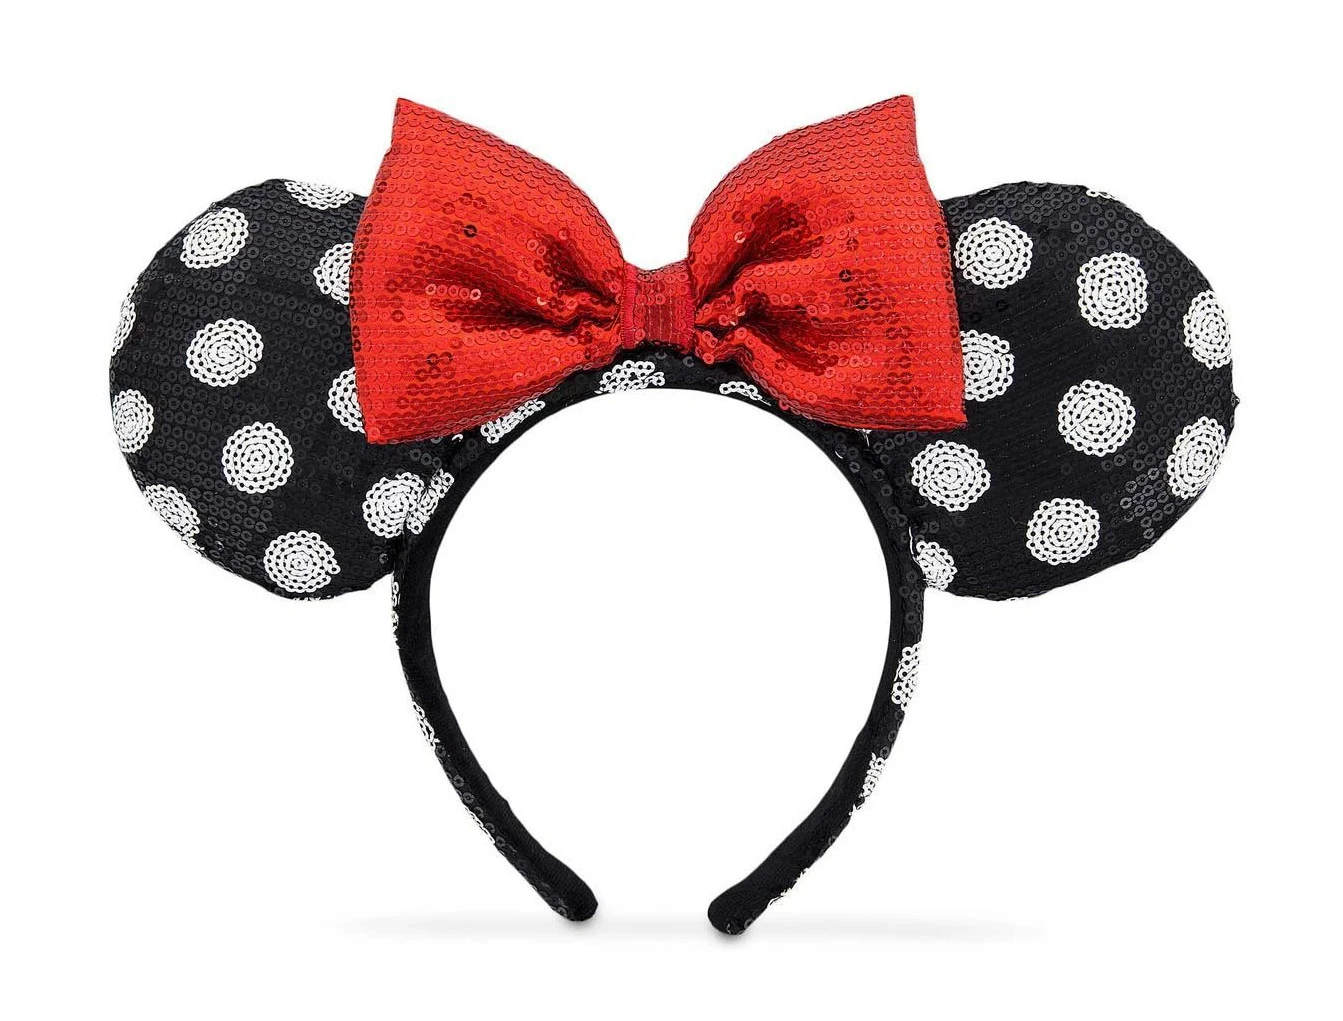 item Disney Parks - Minnie Mouse Ears Headband - Sequined Black Ears with White Polka Dots - Red Bow Sequined Black Ears with White Polka Dots